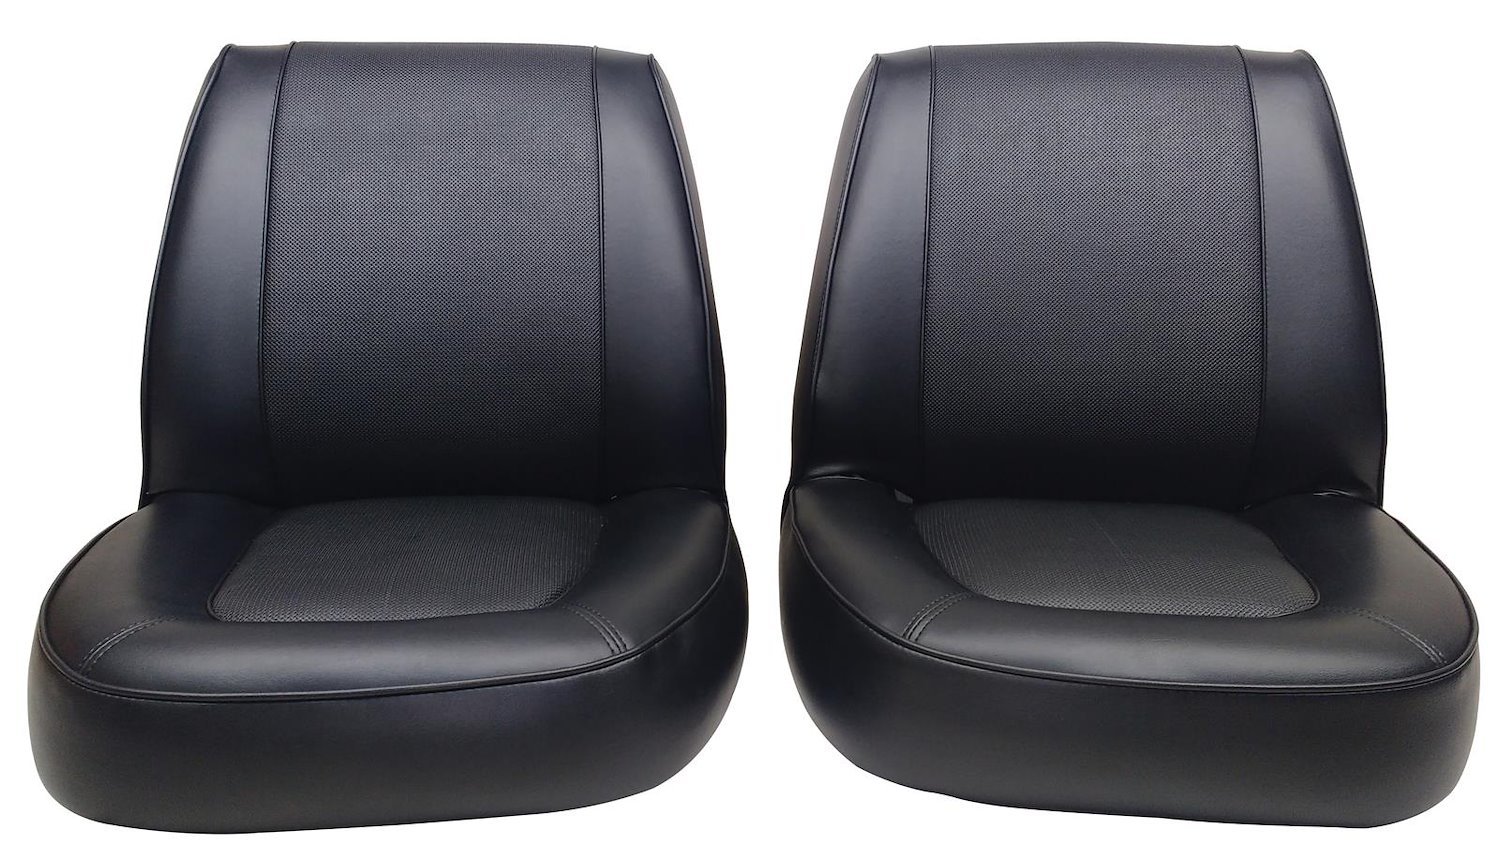 1965 Chevrolet Chevelle Malibu and Super Sport Two-Tone Interior Front Bucket Seat Upholstery Set